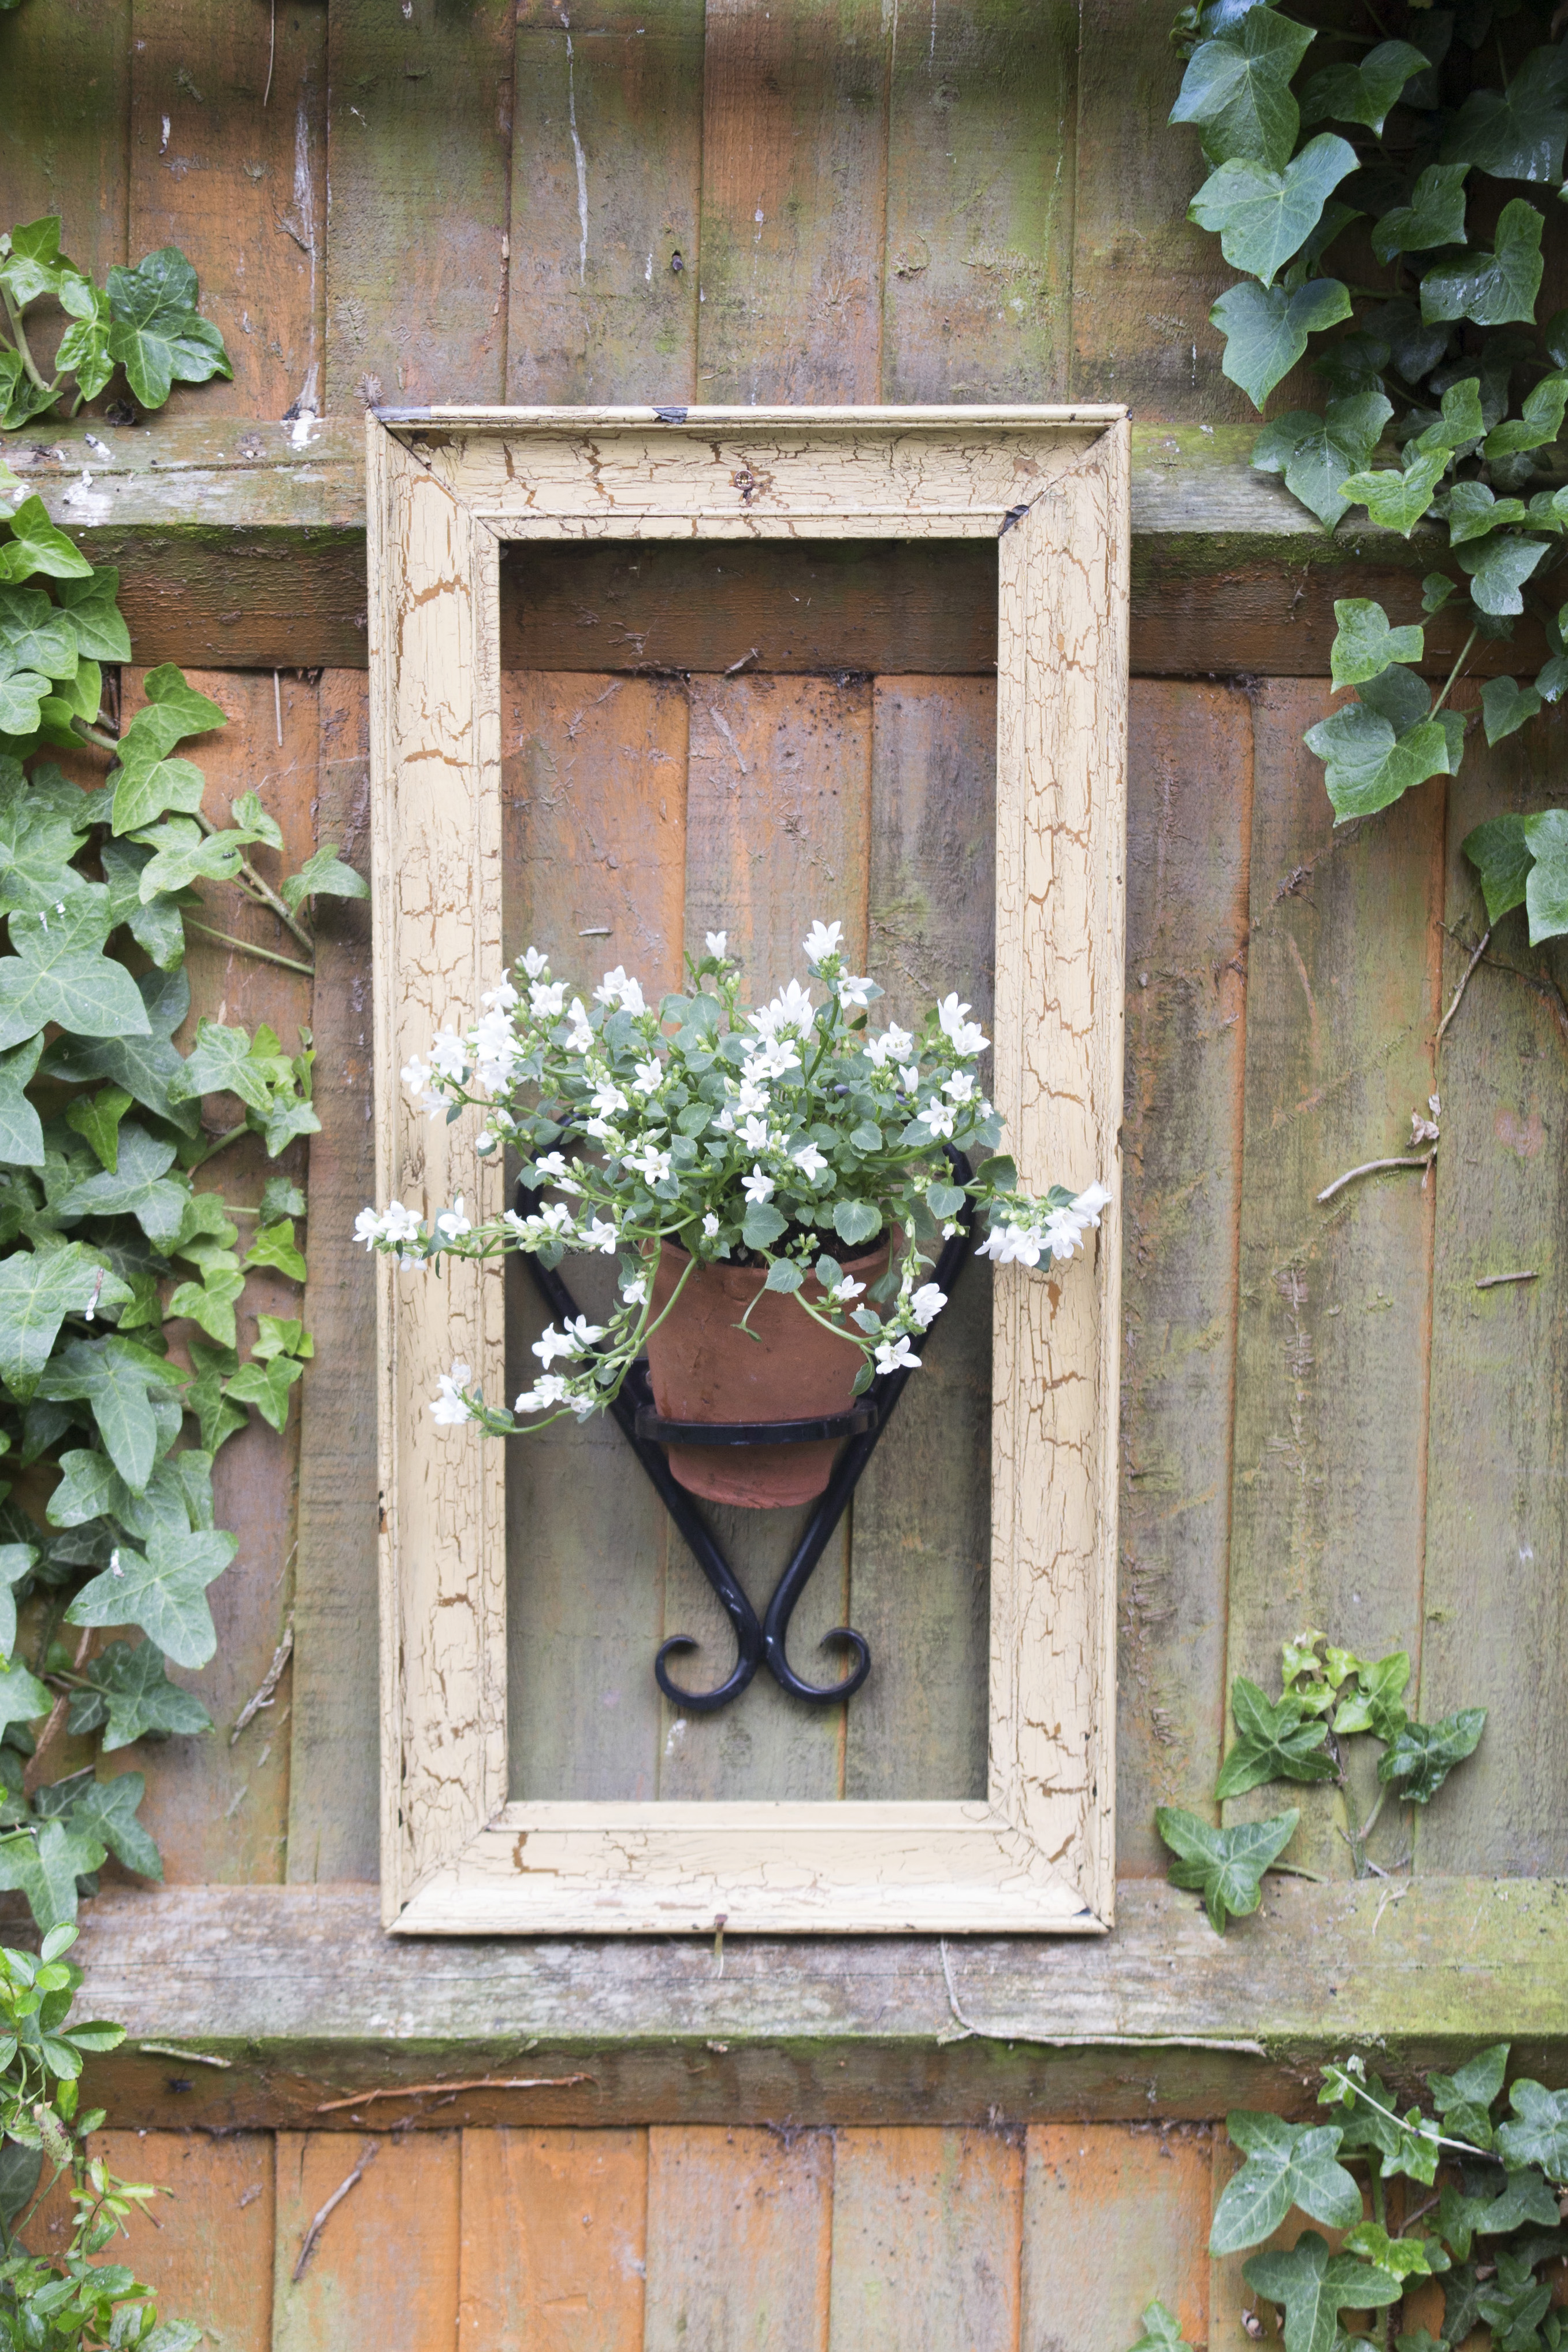 11 charming small garden ideas on a budget - the middle-sized garden